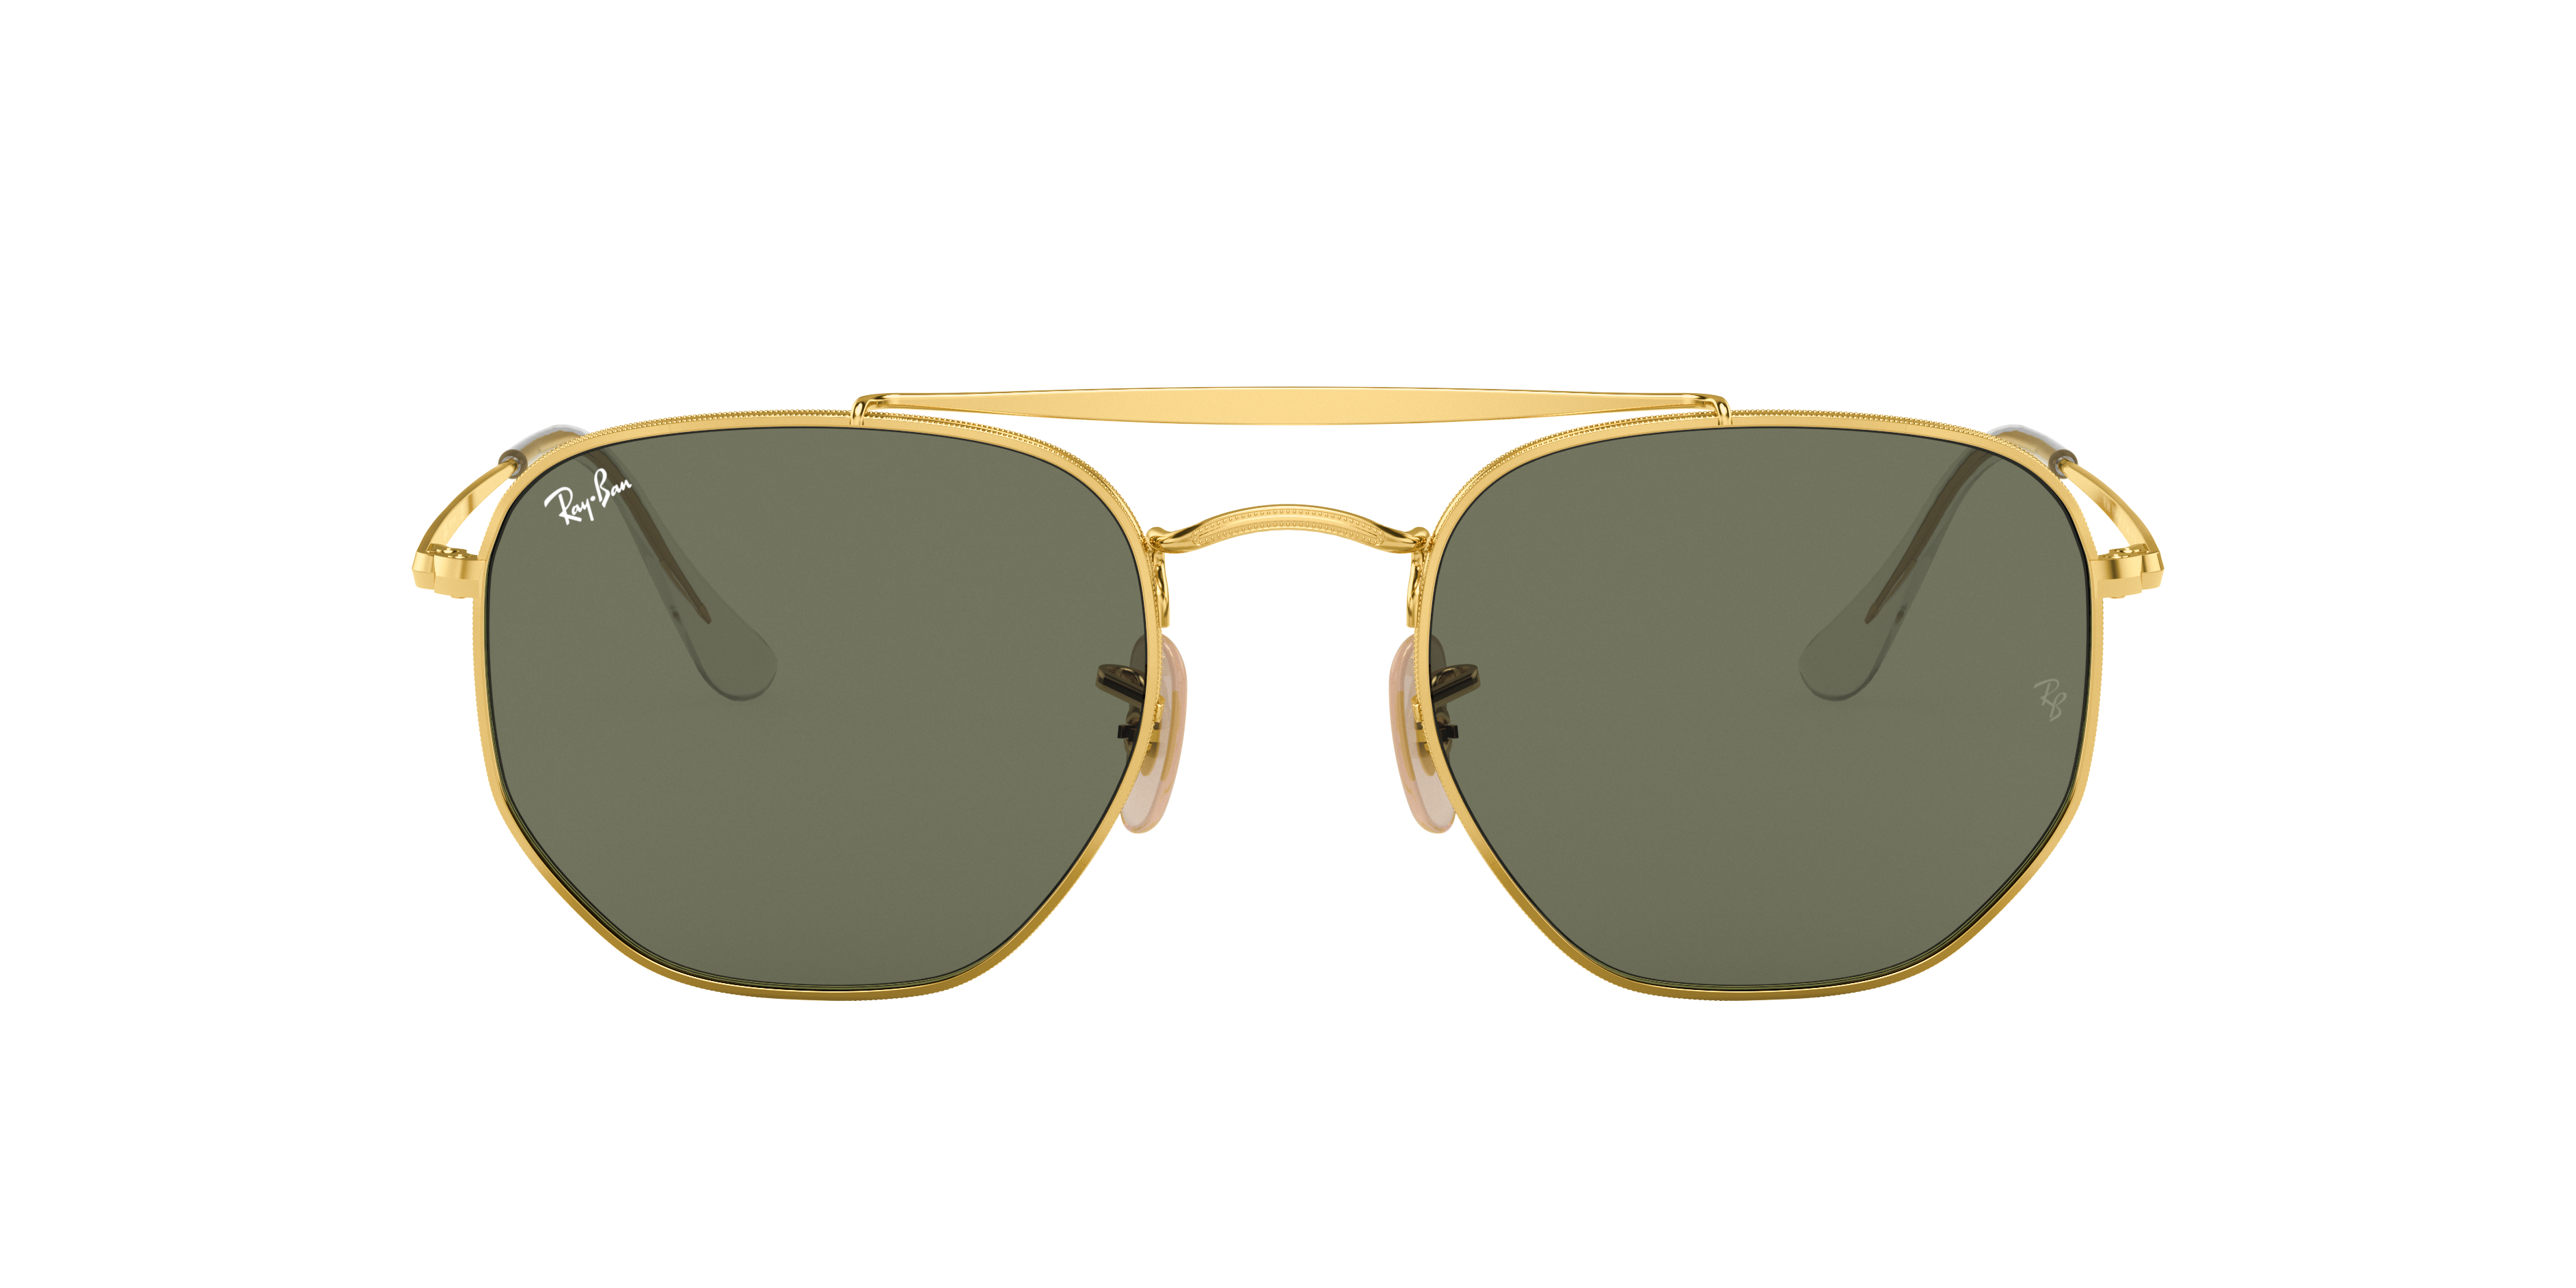 ray ban general on face